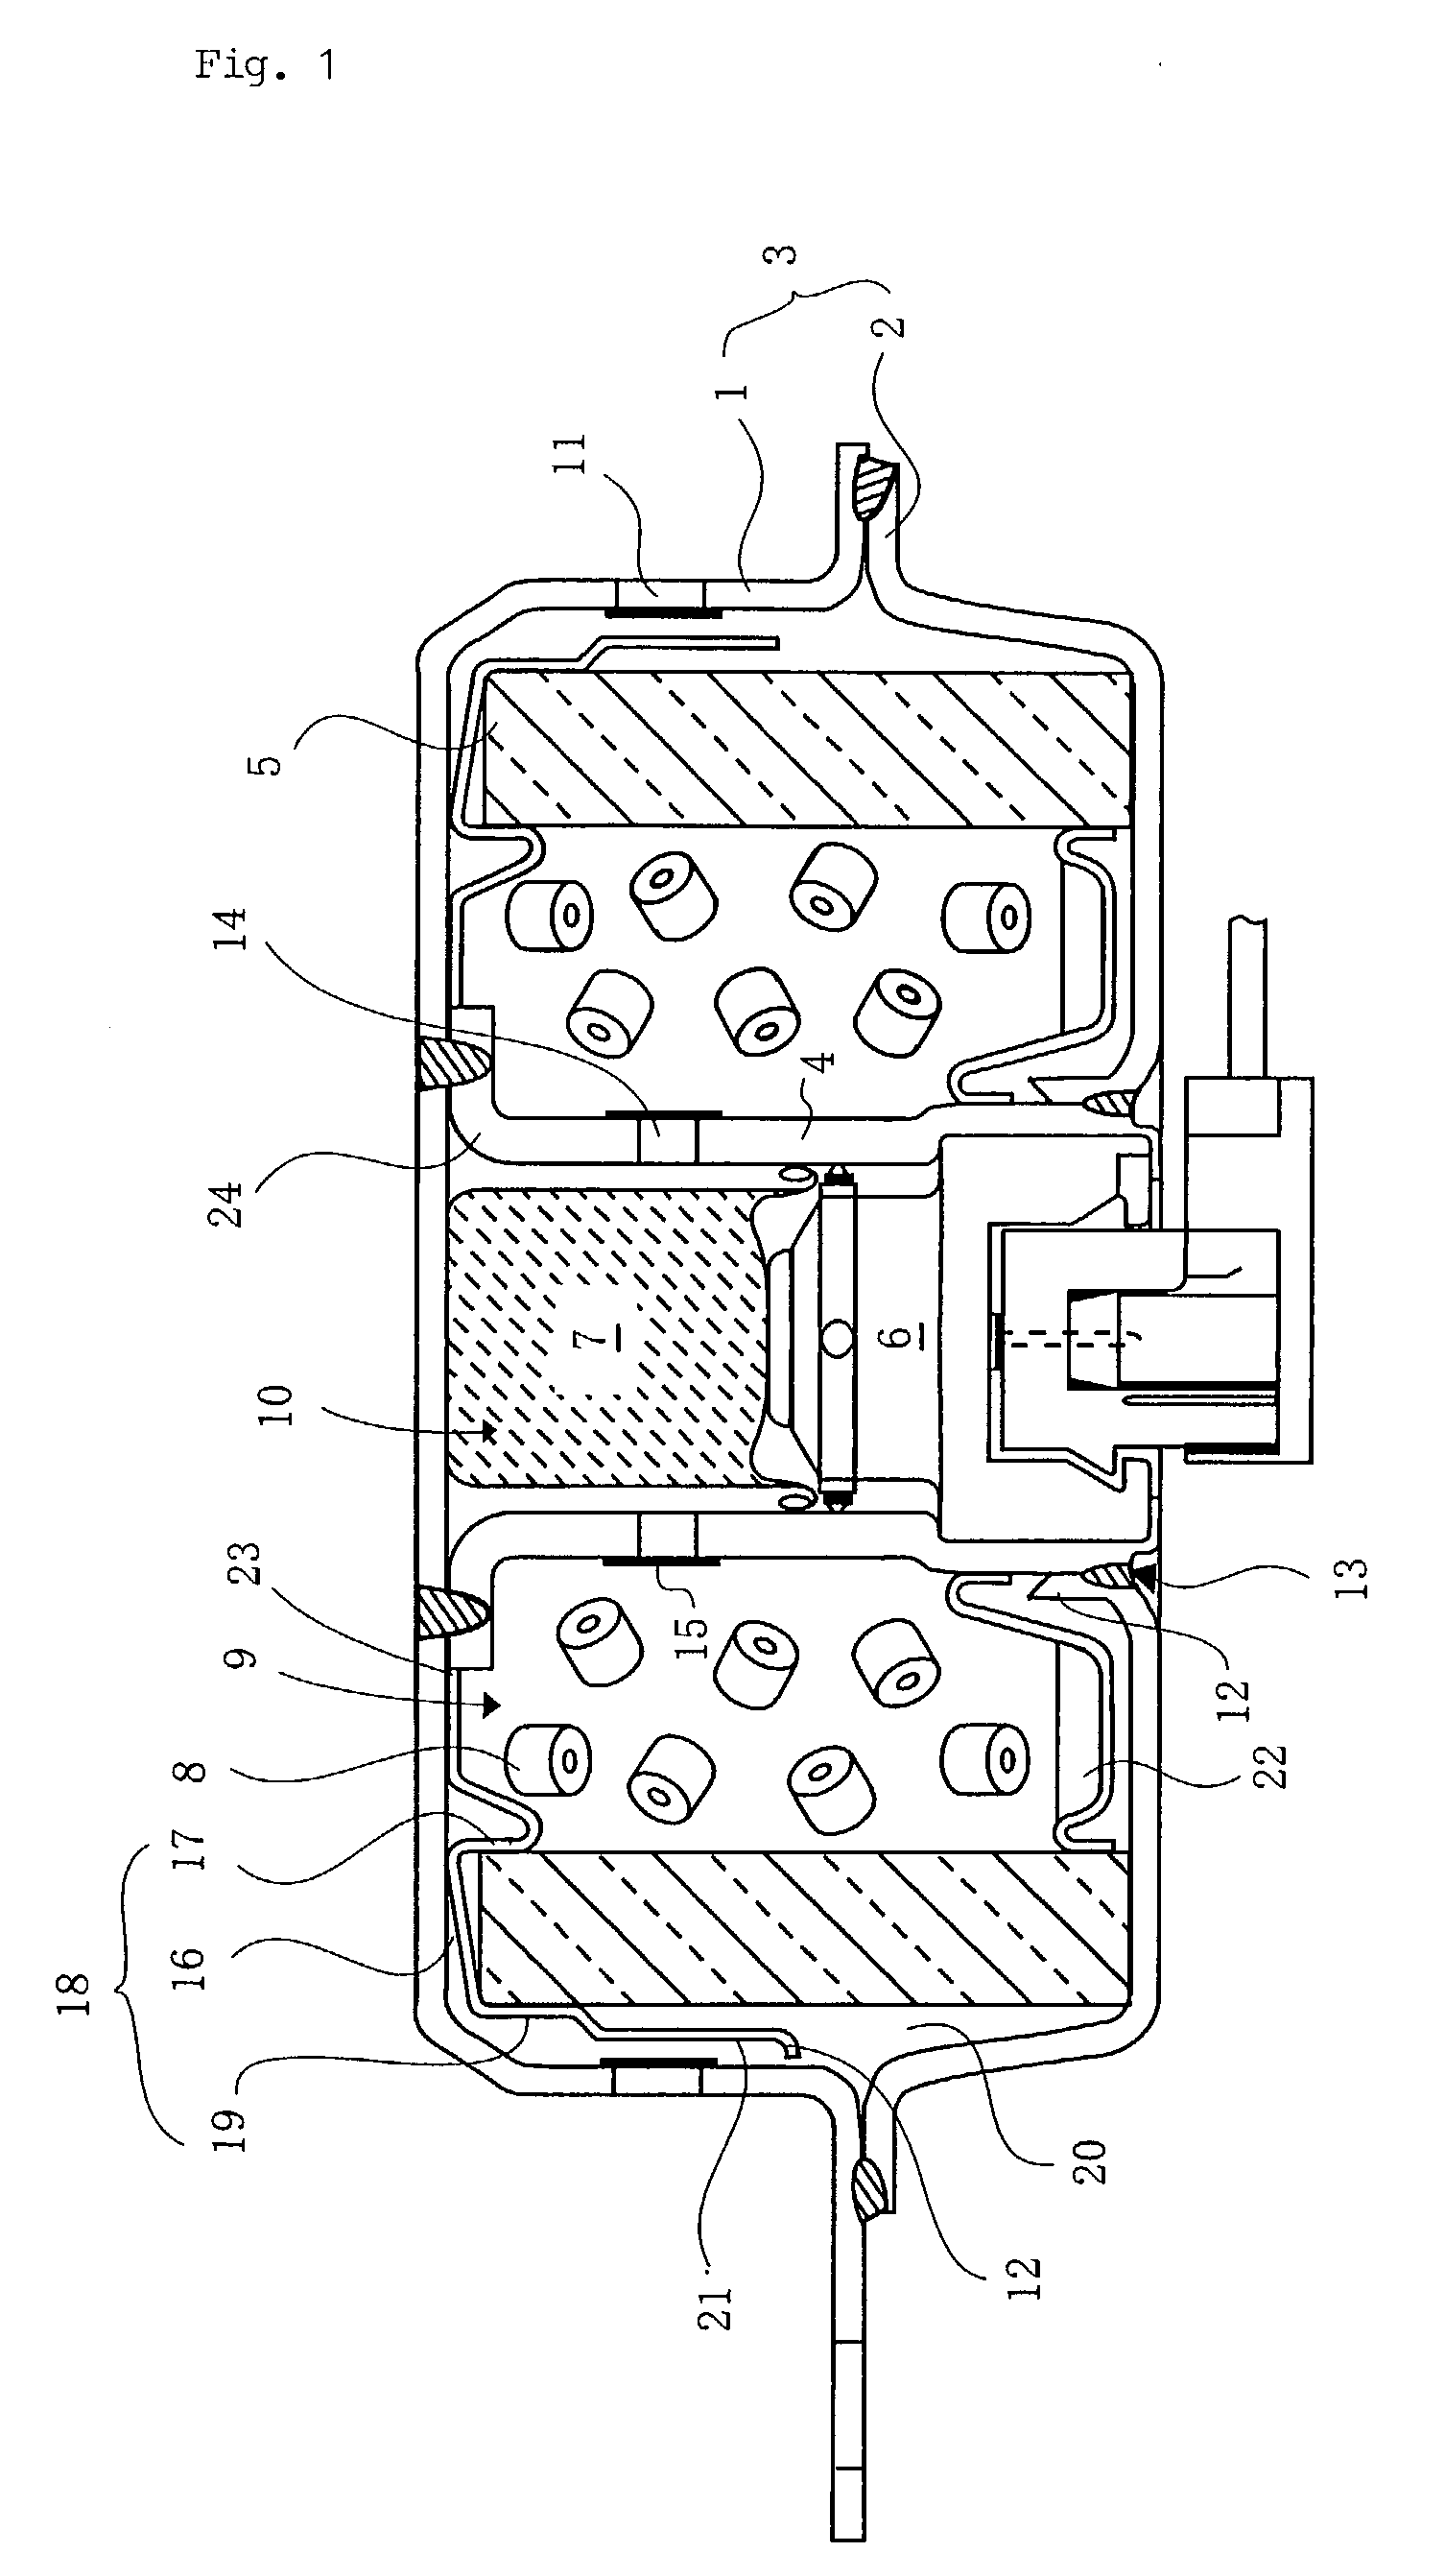 Airbag generator, deflector member, coolant/filter means support member, coolant, and housing